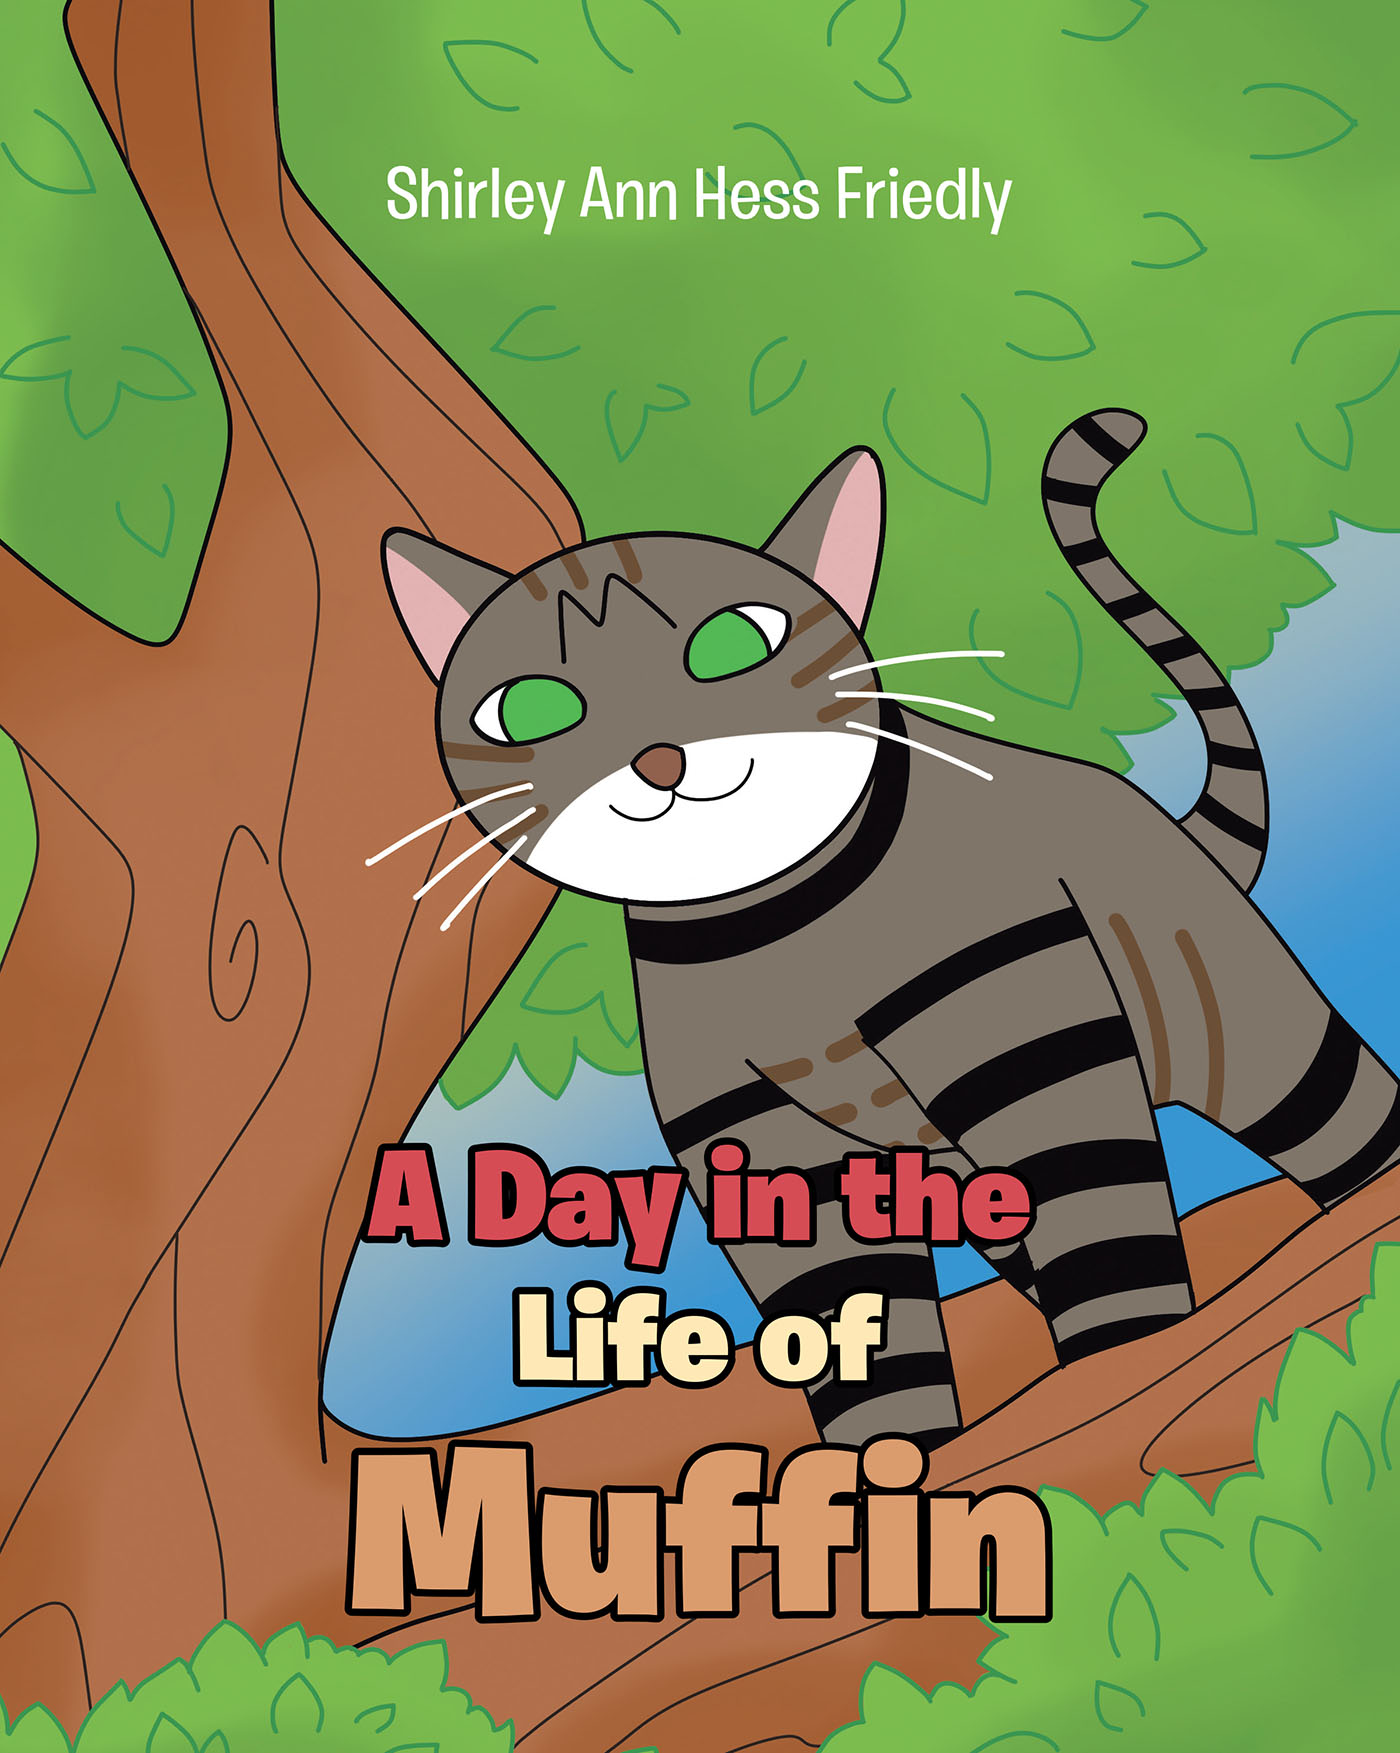 Shirley Ann Hess Friedly’s Newly Released "A Day in the Life of Muffin" is a Delightful True Story of a Beloved Cat